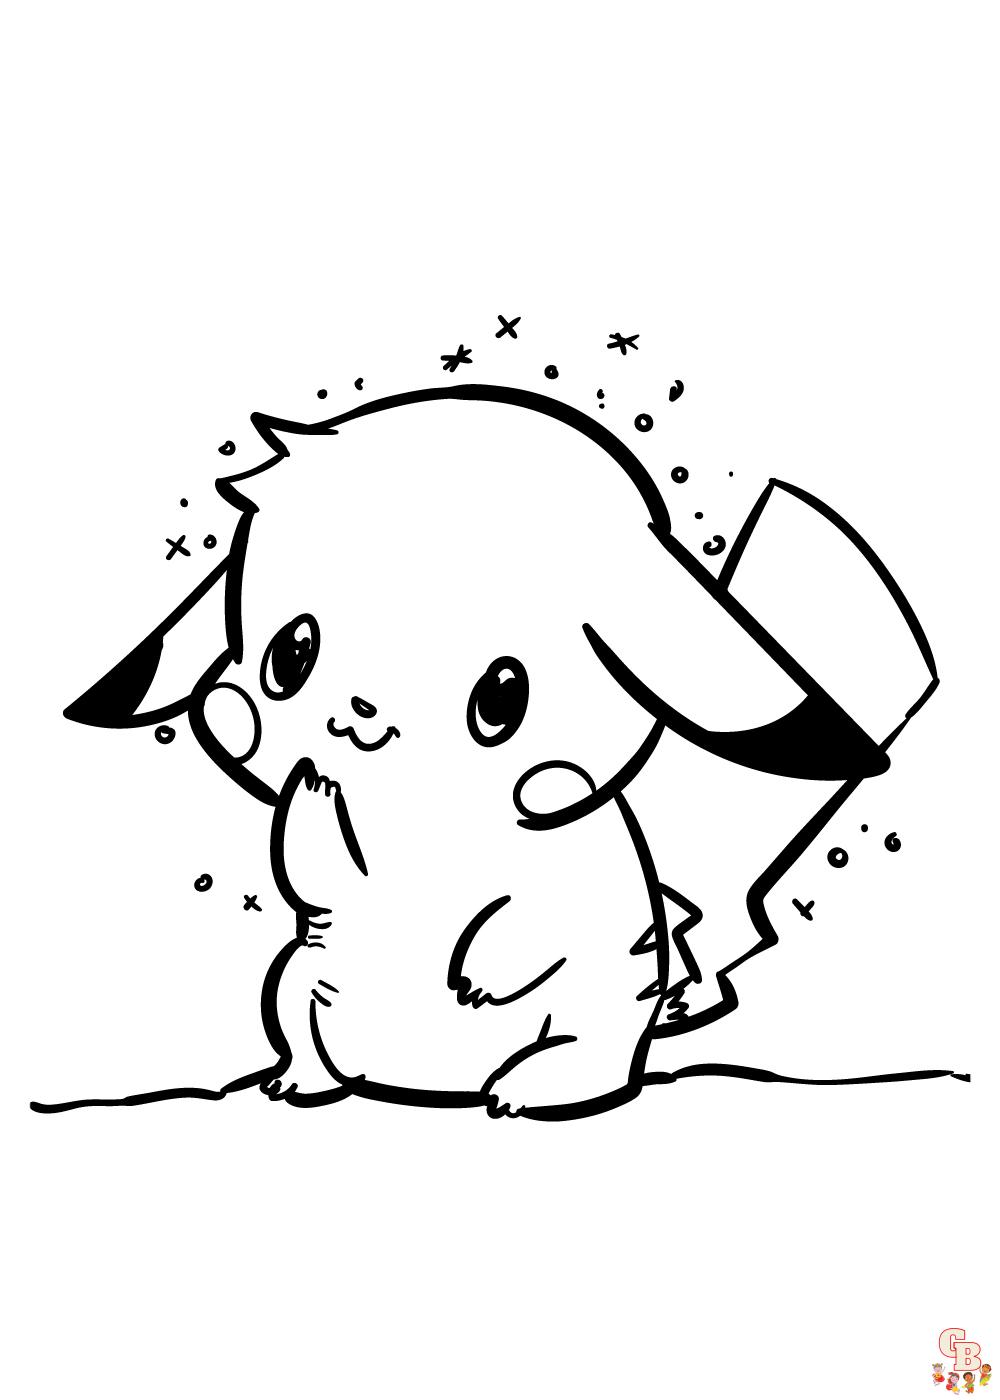 Cute Pokemon coloring pages 13 1